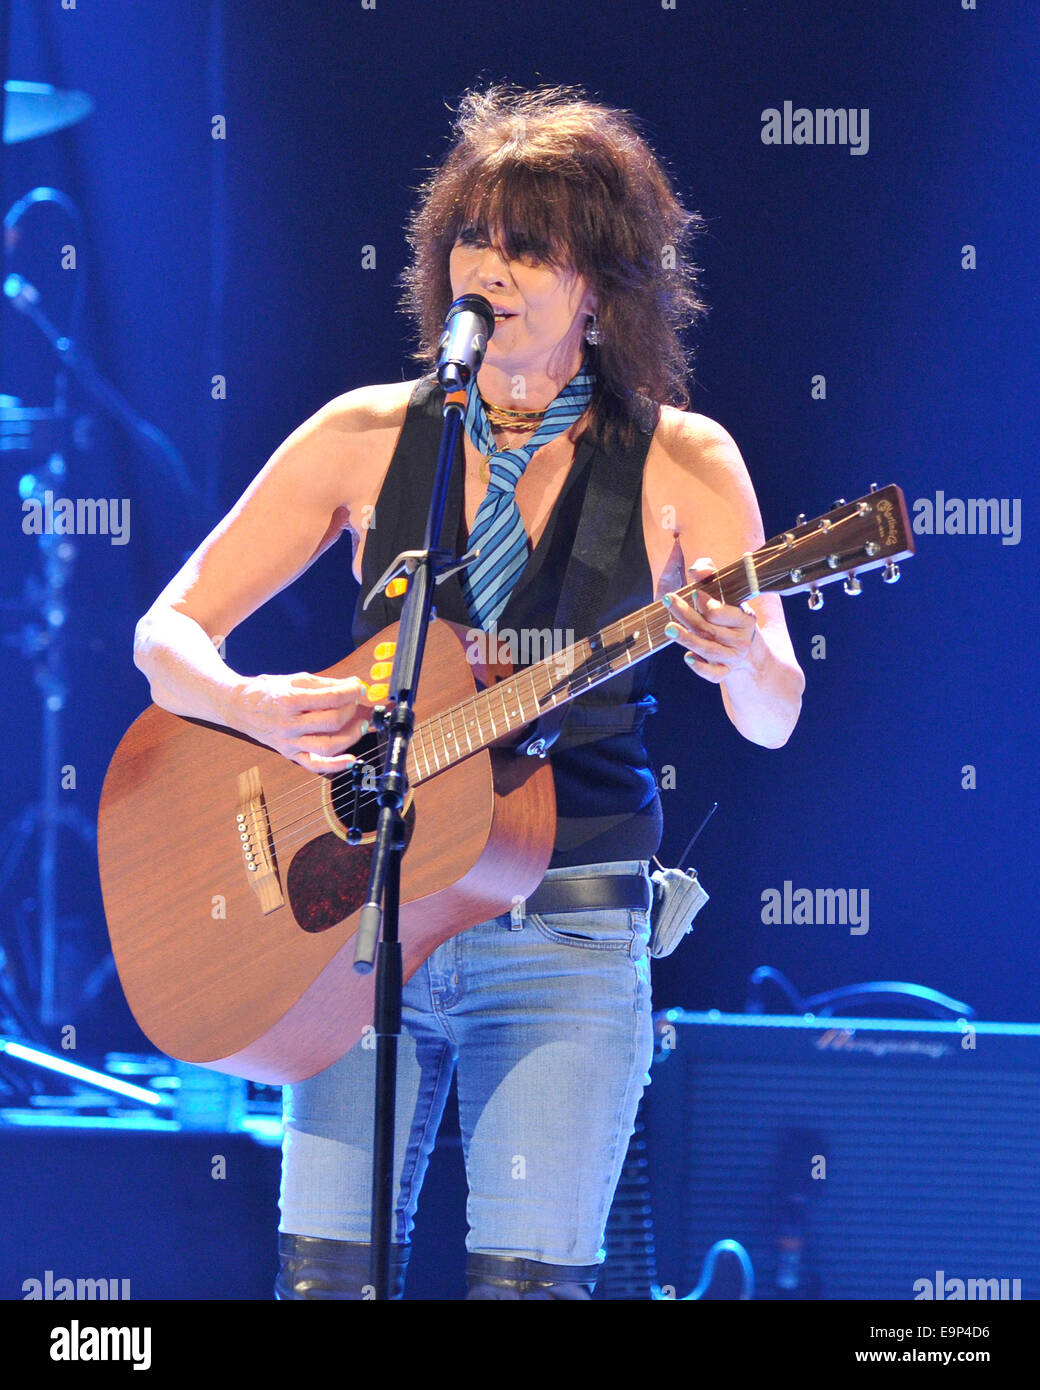 Toronto, Canada. 30th Oct 2014. American musician Christine Ellen  "Chrissie" Hynde performs at Massey Hall. Credit: EXImages/Alamy Live News  Stock Photo - Alamy